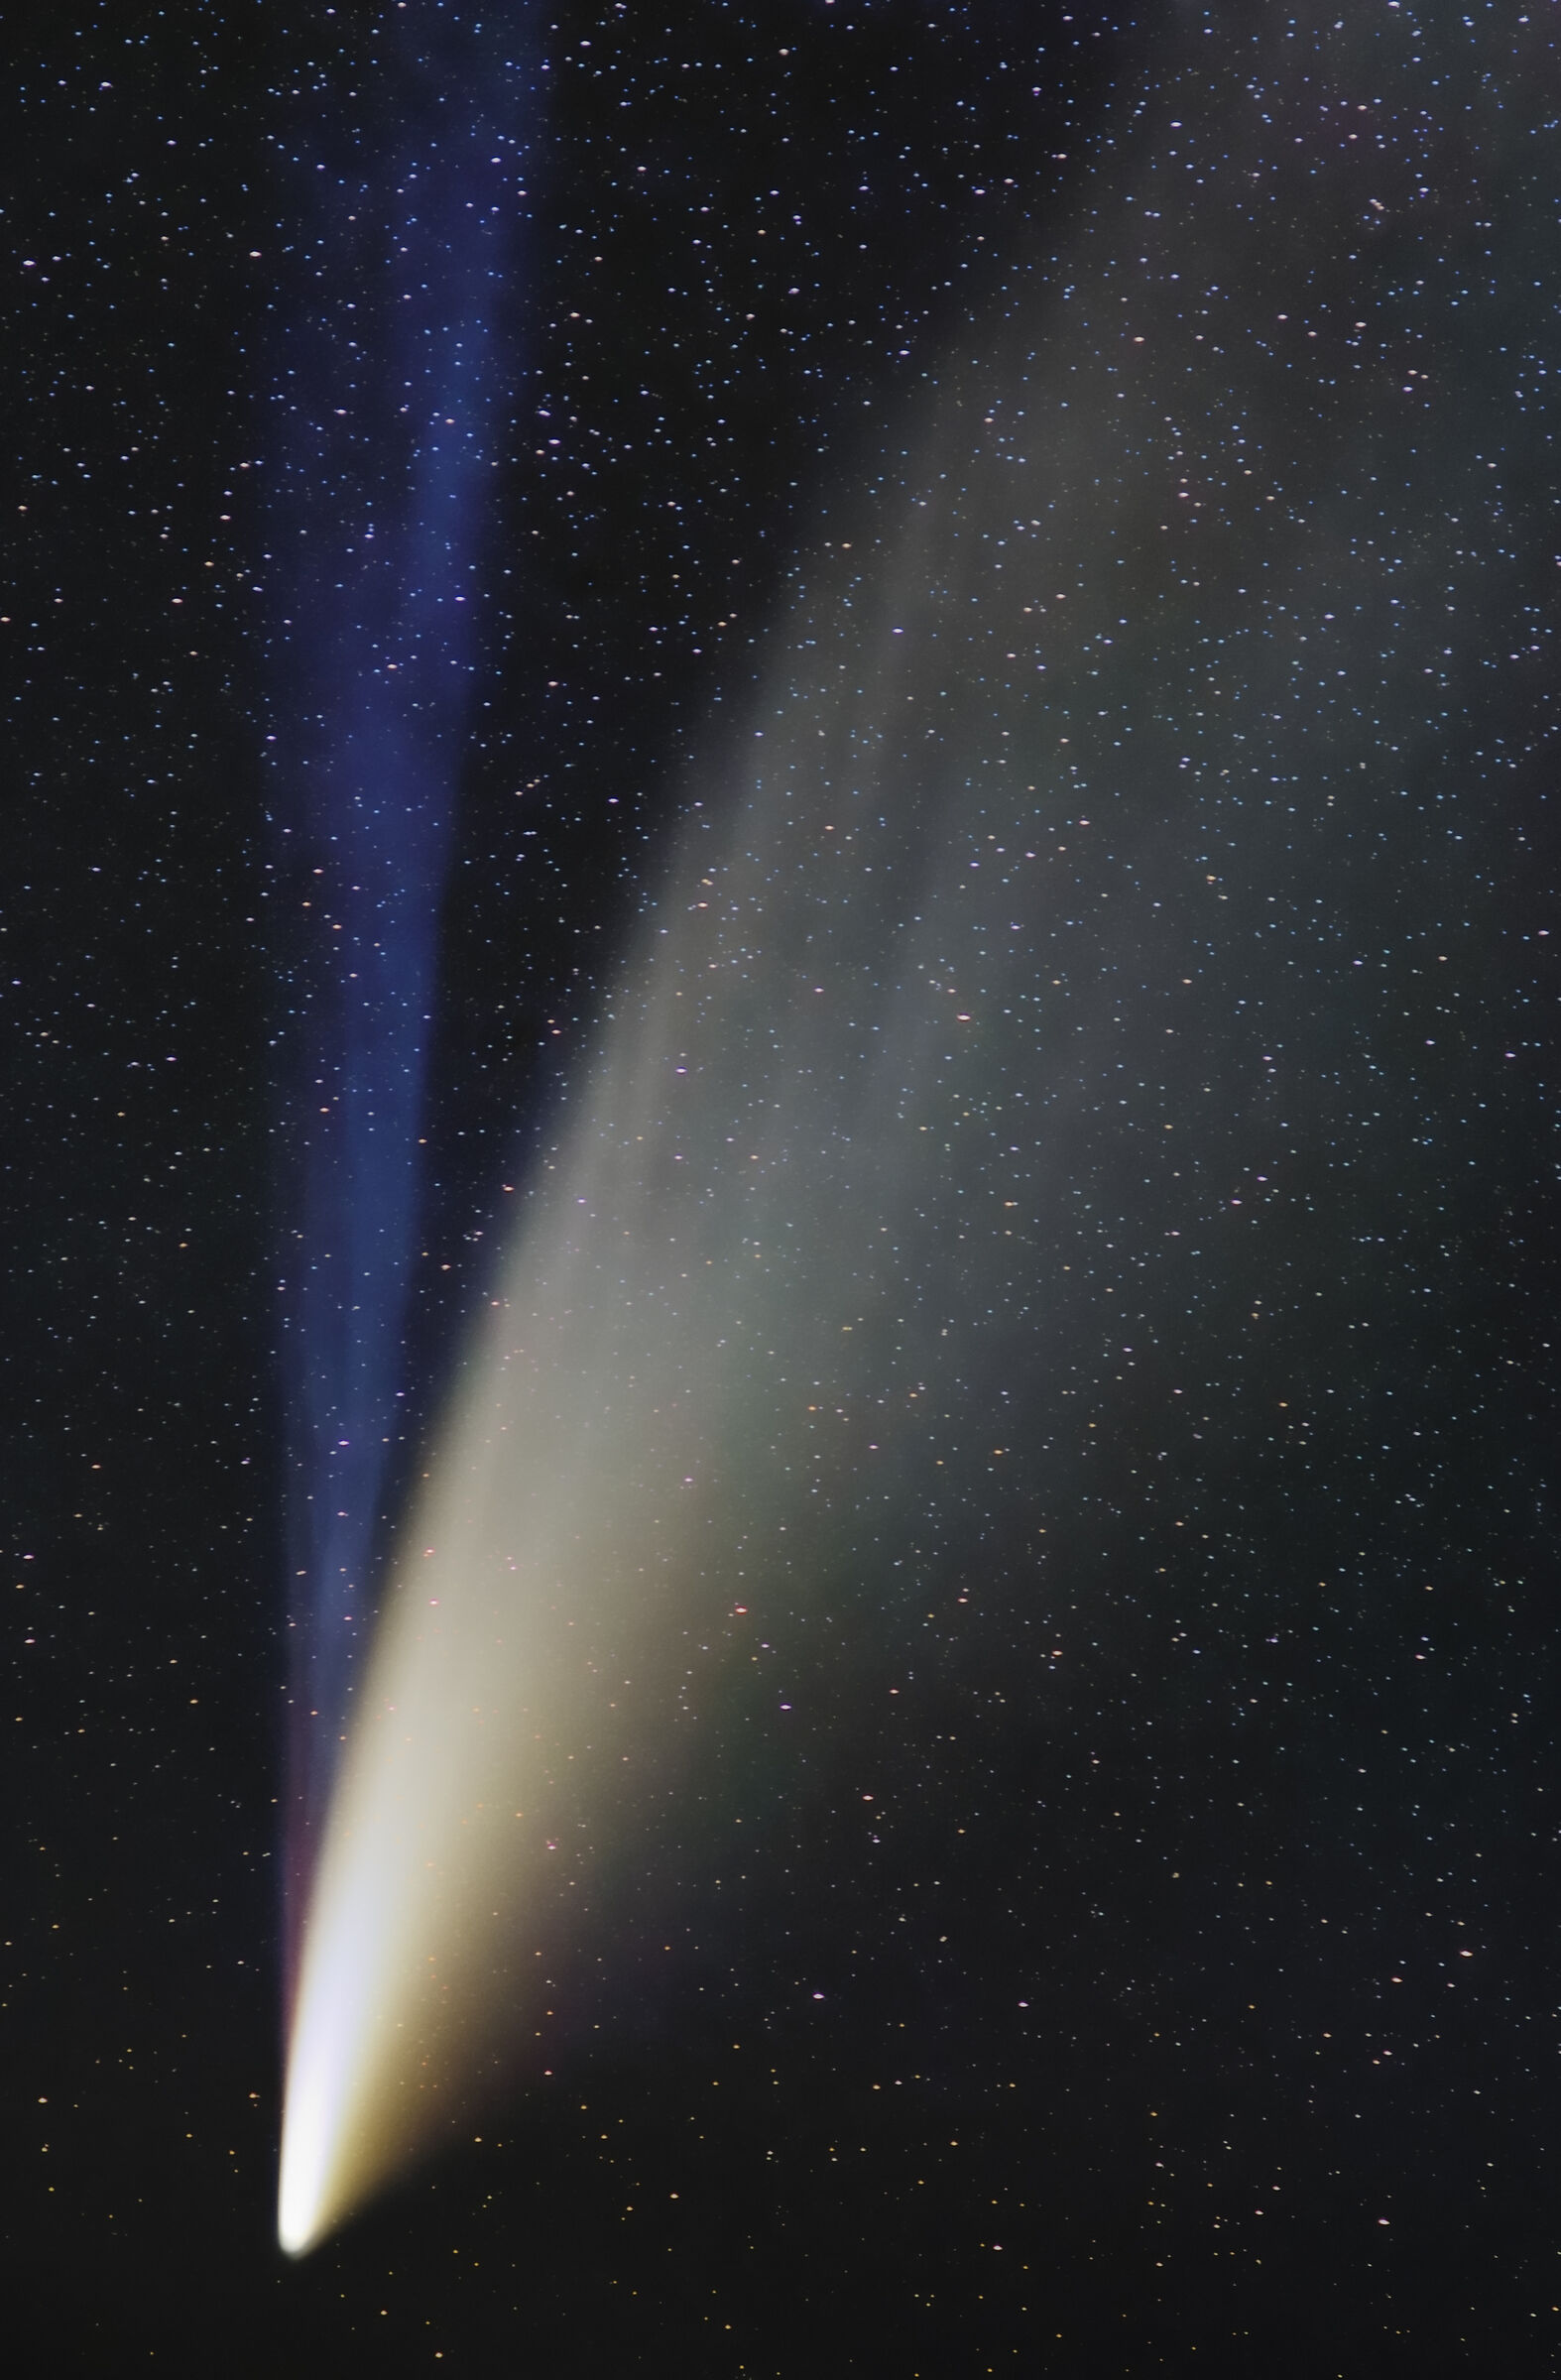 Comet neowise and its tails...